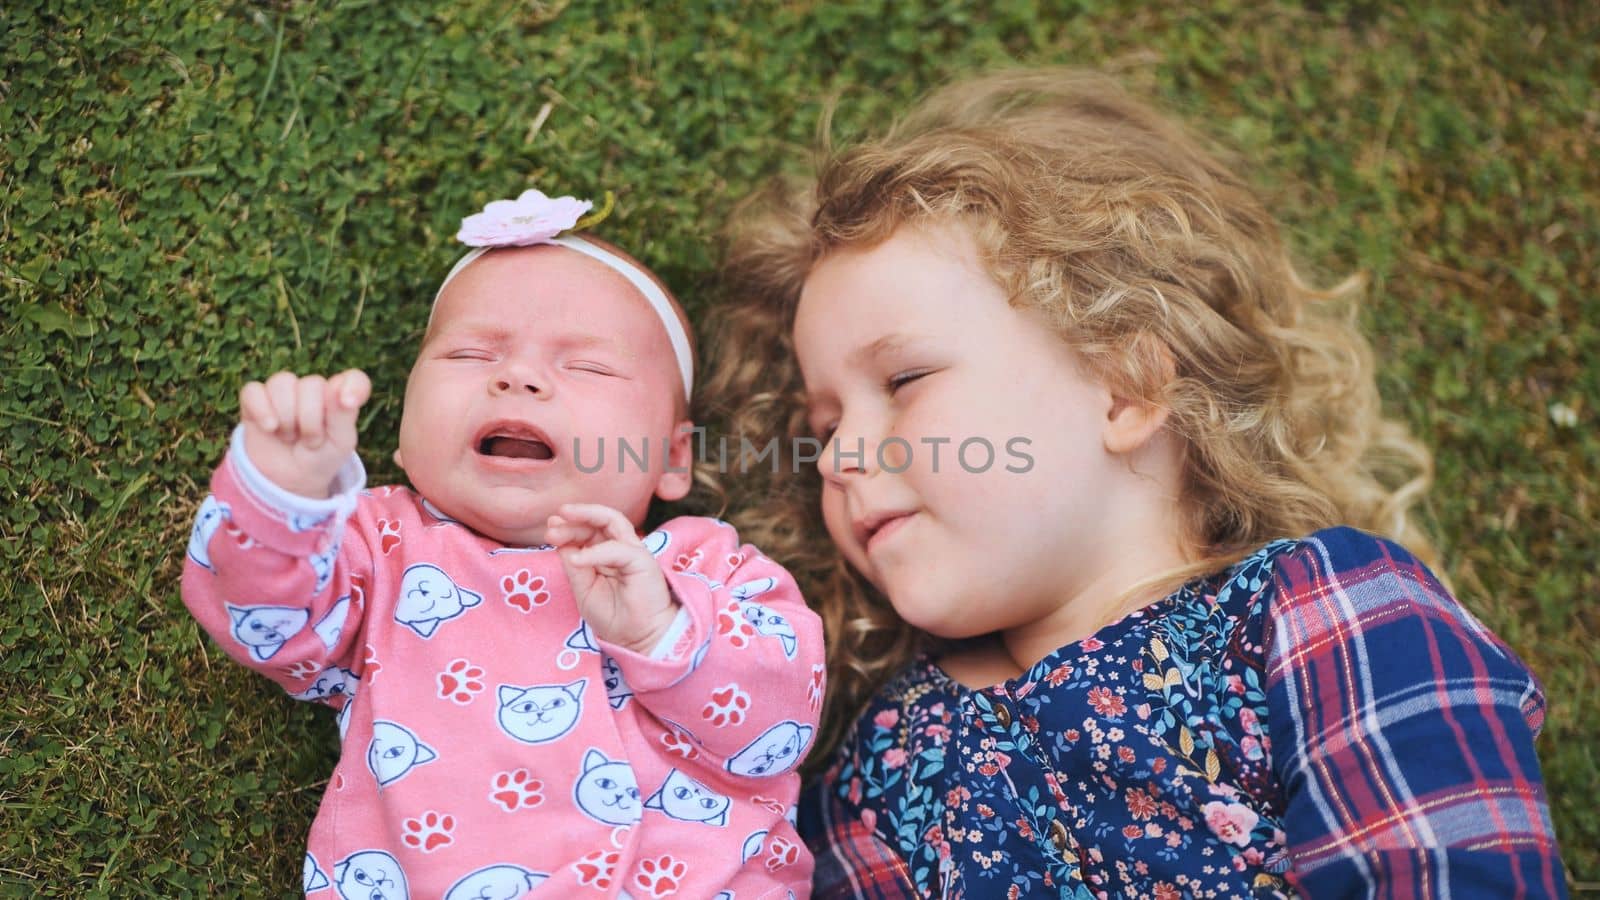 A little girl kisses her baby sister in the garden on the grass